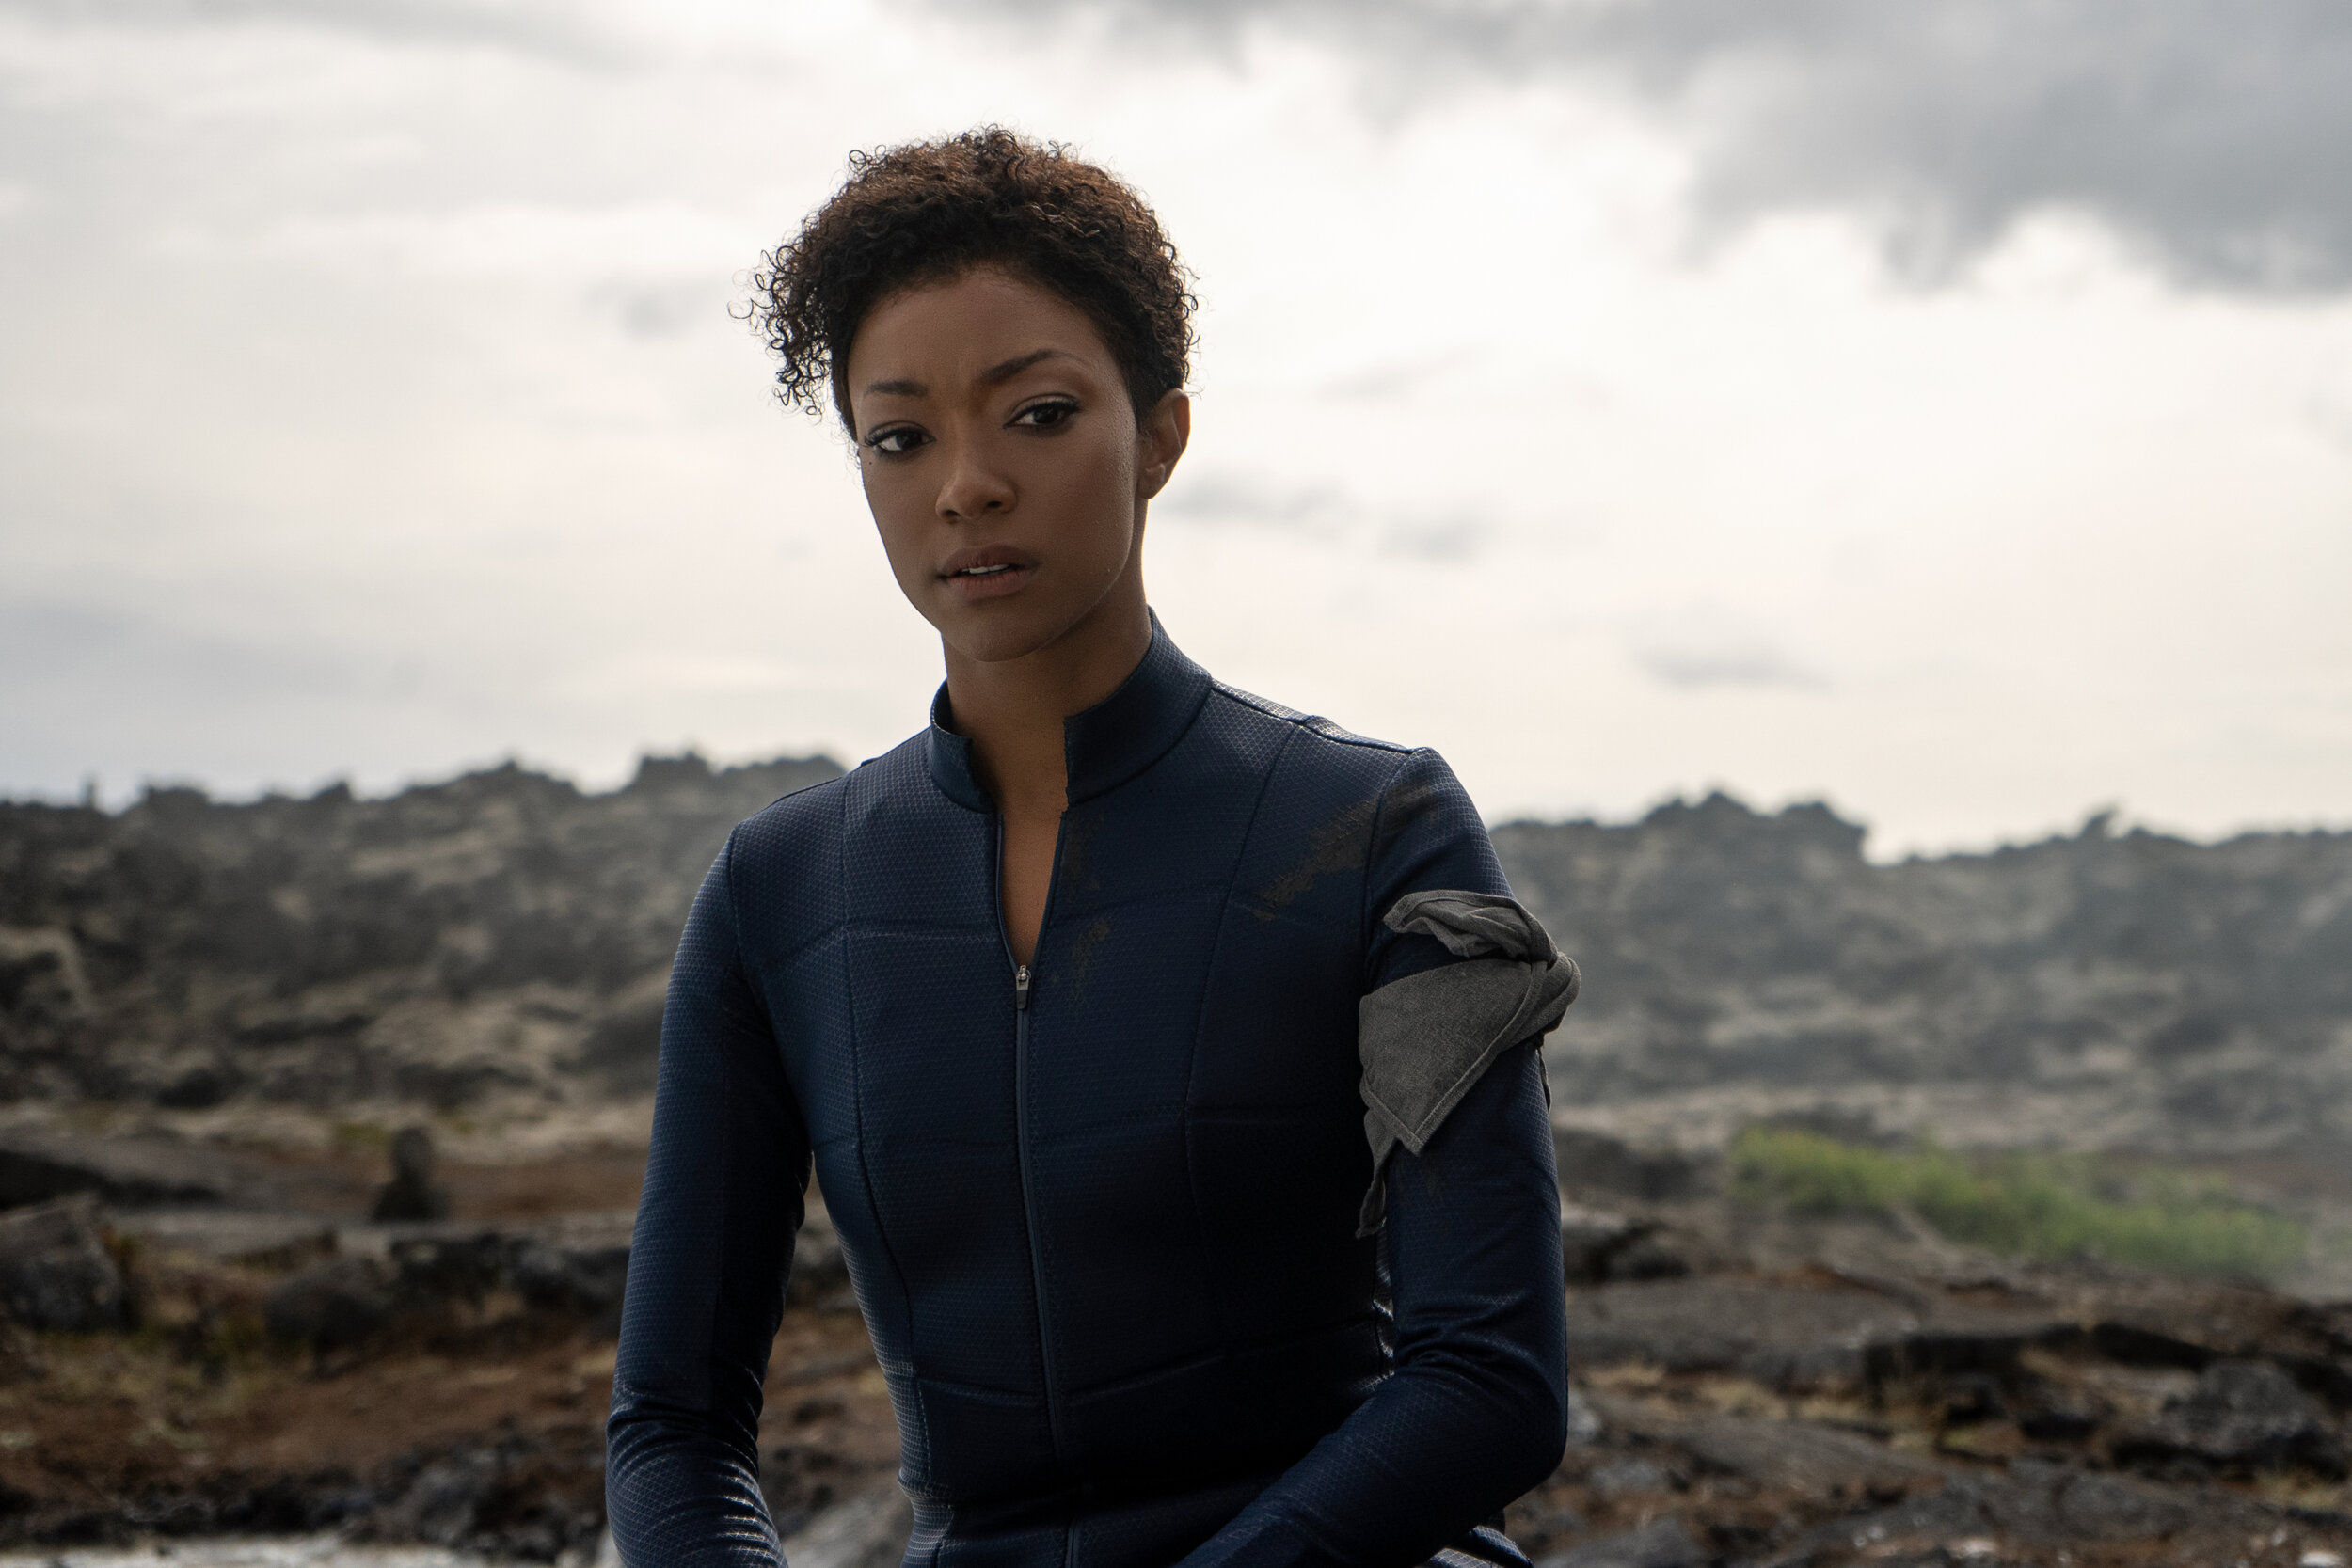  Pictured: Sonequa Martin-Green as Burnham; of the CBS All Access series STAR TREK: DISCOVERY. Photo Cr: Michael Gibson/CBS ©2020 CBS Interactive, Inc. All Rights Reserved. 